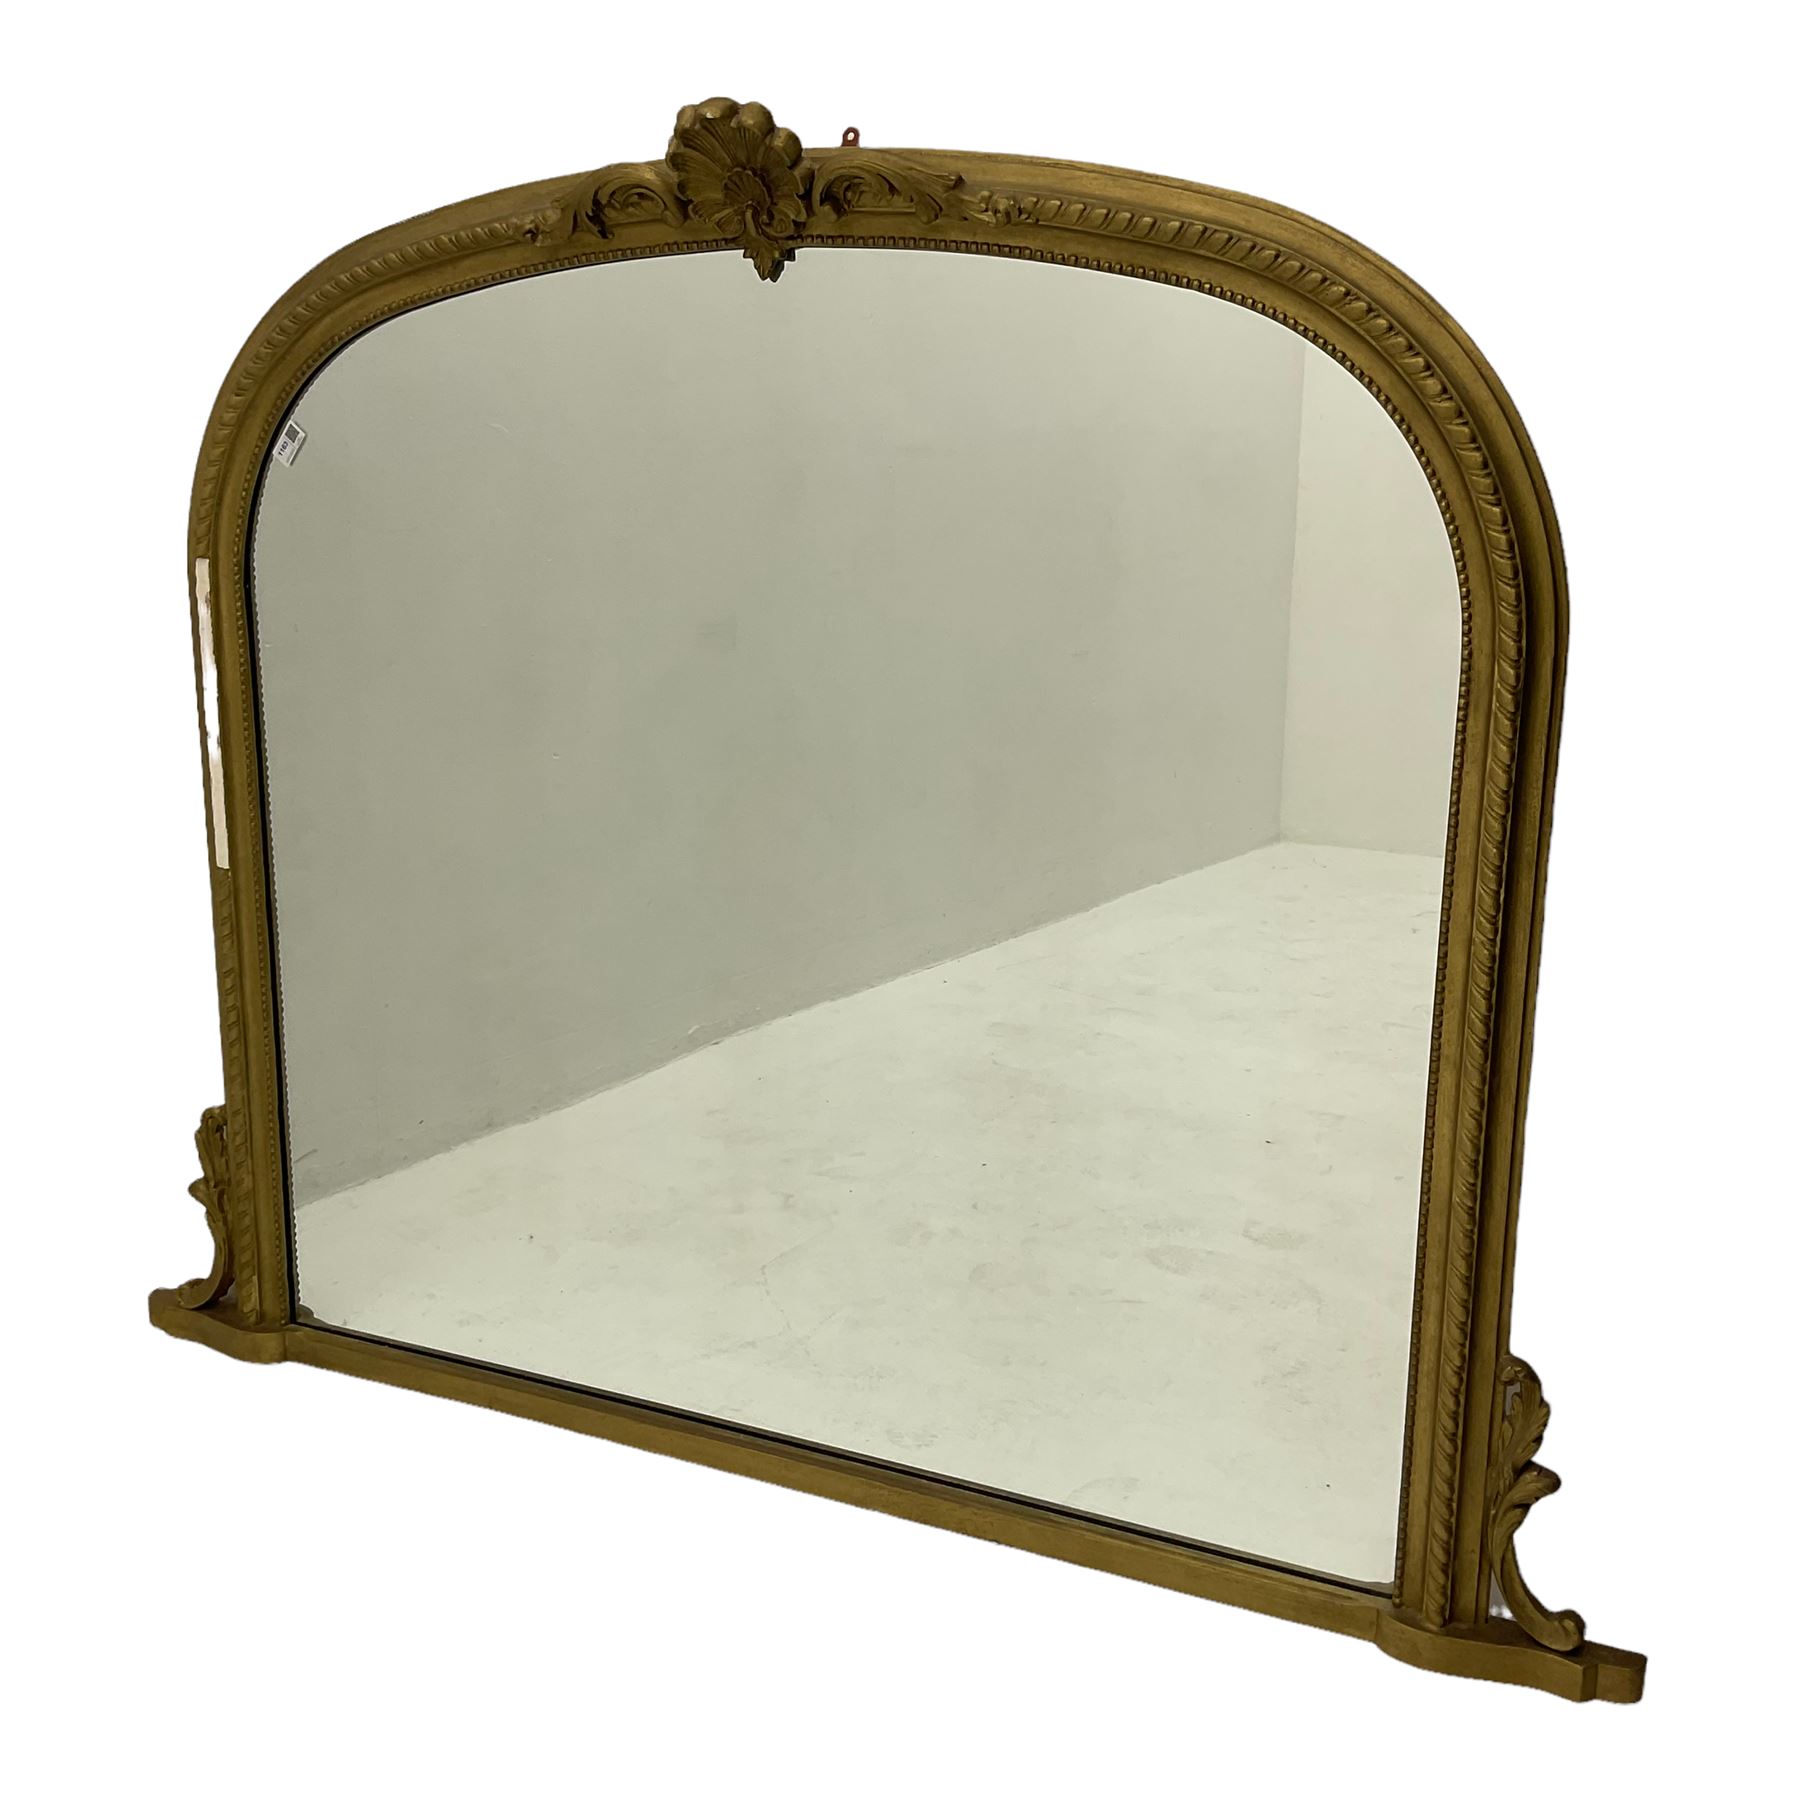 Late 20th century gilt overmantle mirror